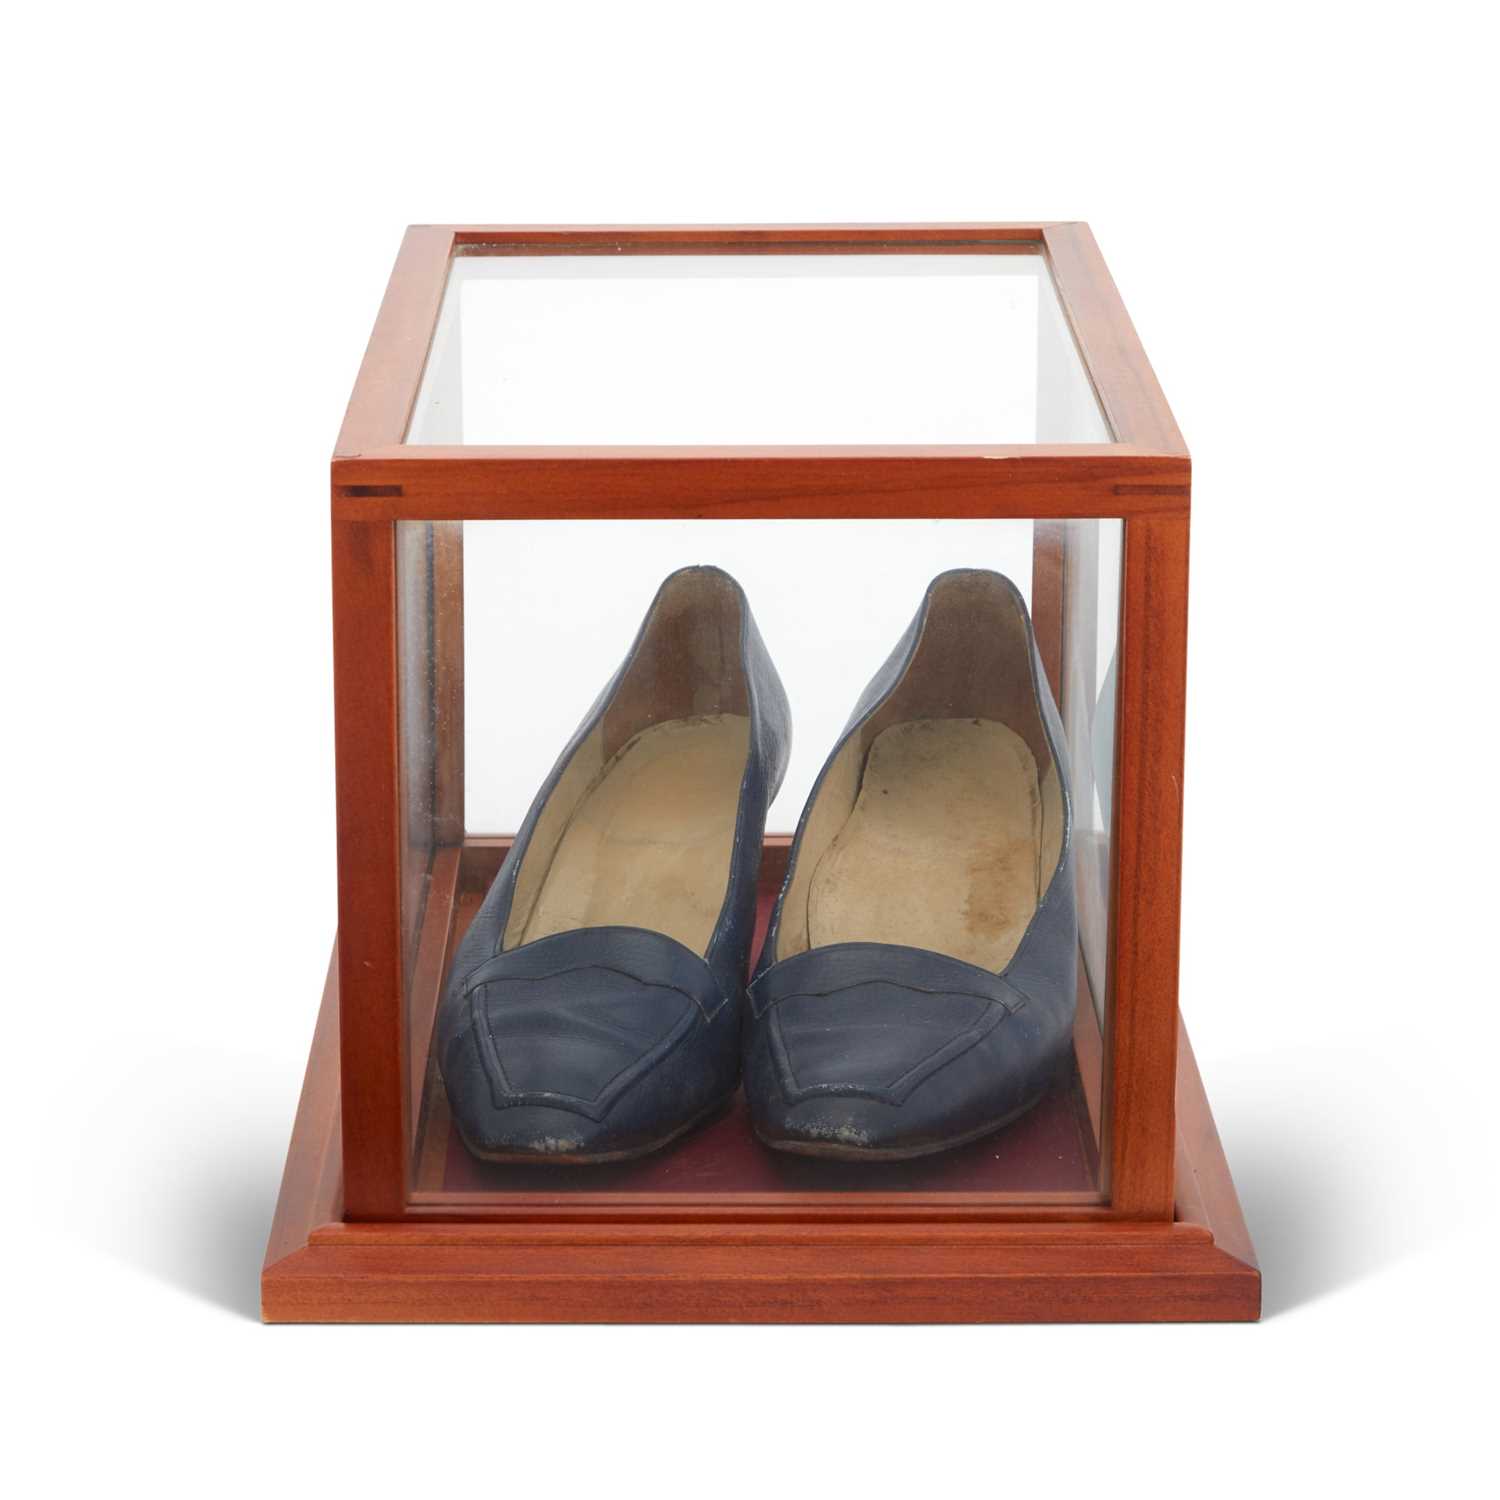 Lot 5022 - Pair of Italian shoes worn by Jacqueline Kennedy